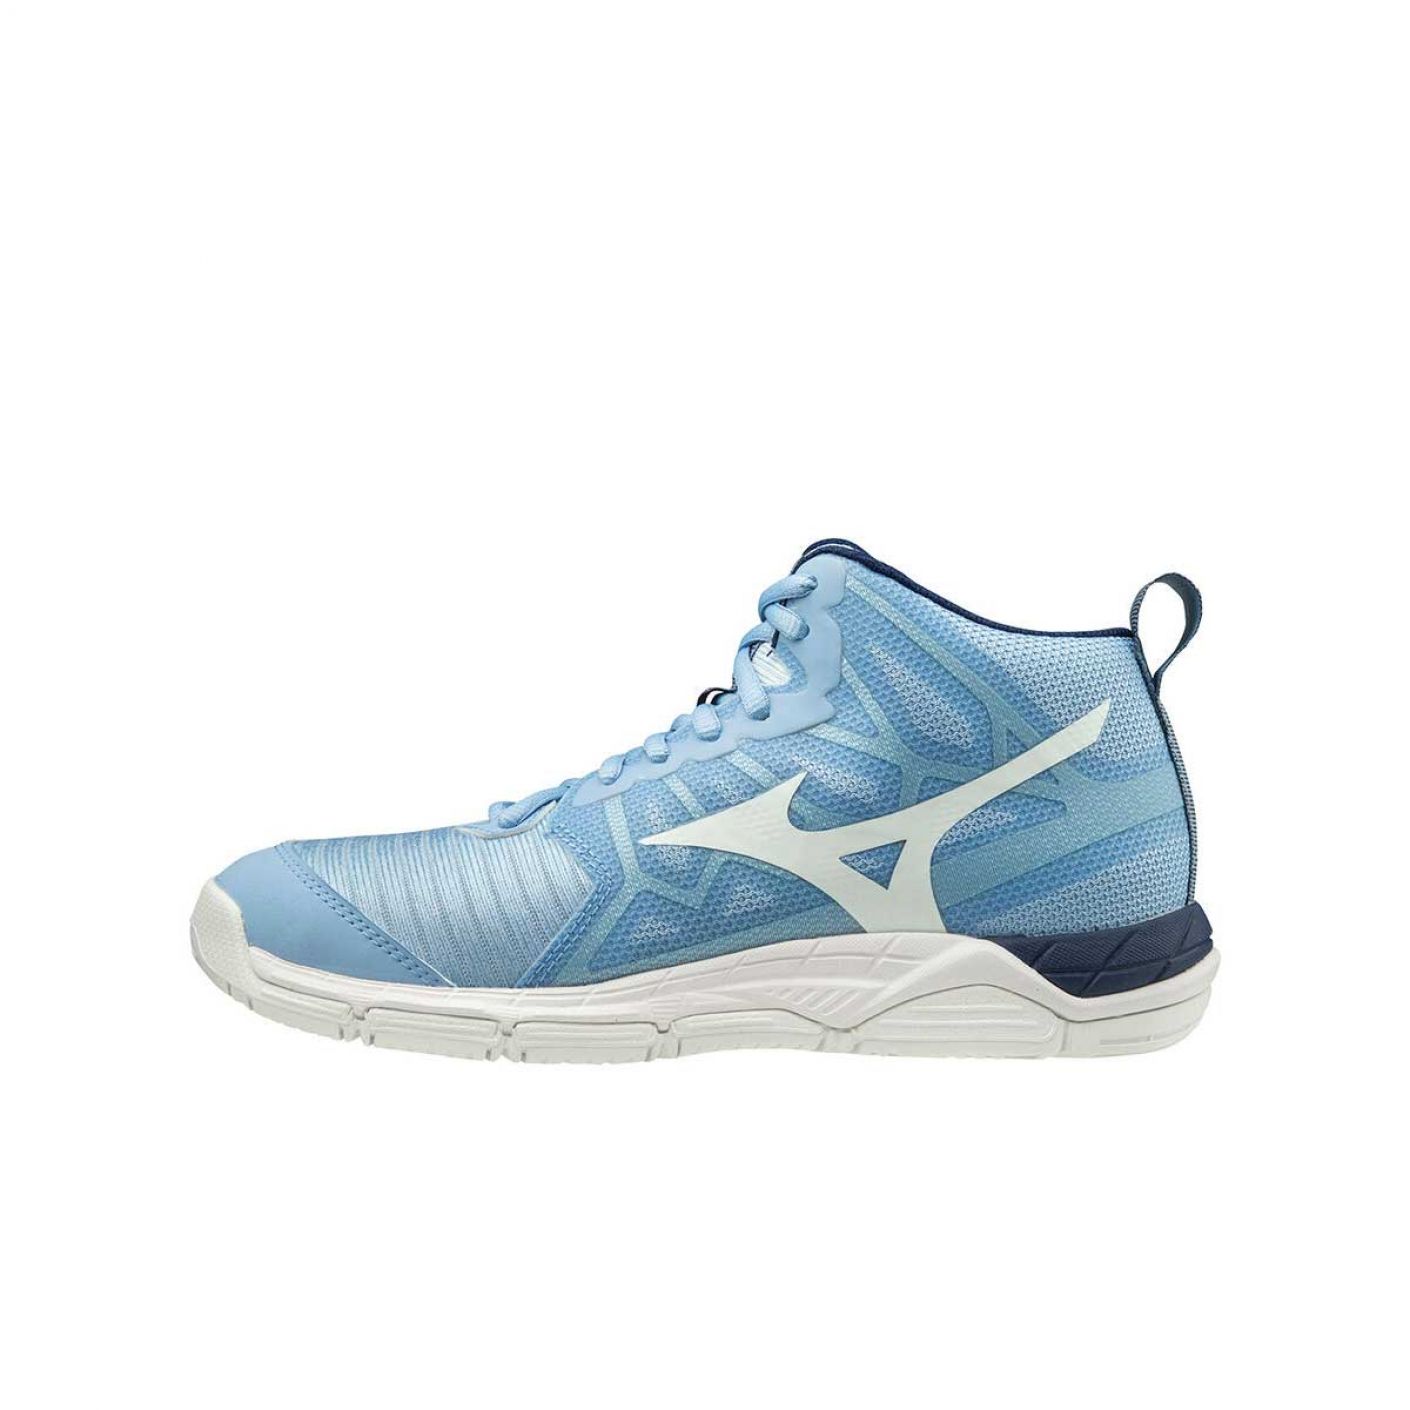 Mizuno Wave Supersonic 2 Mid for Woman Light Blue